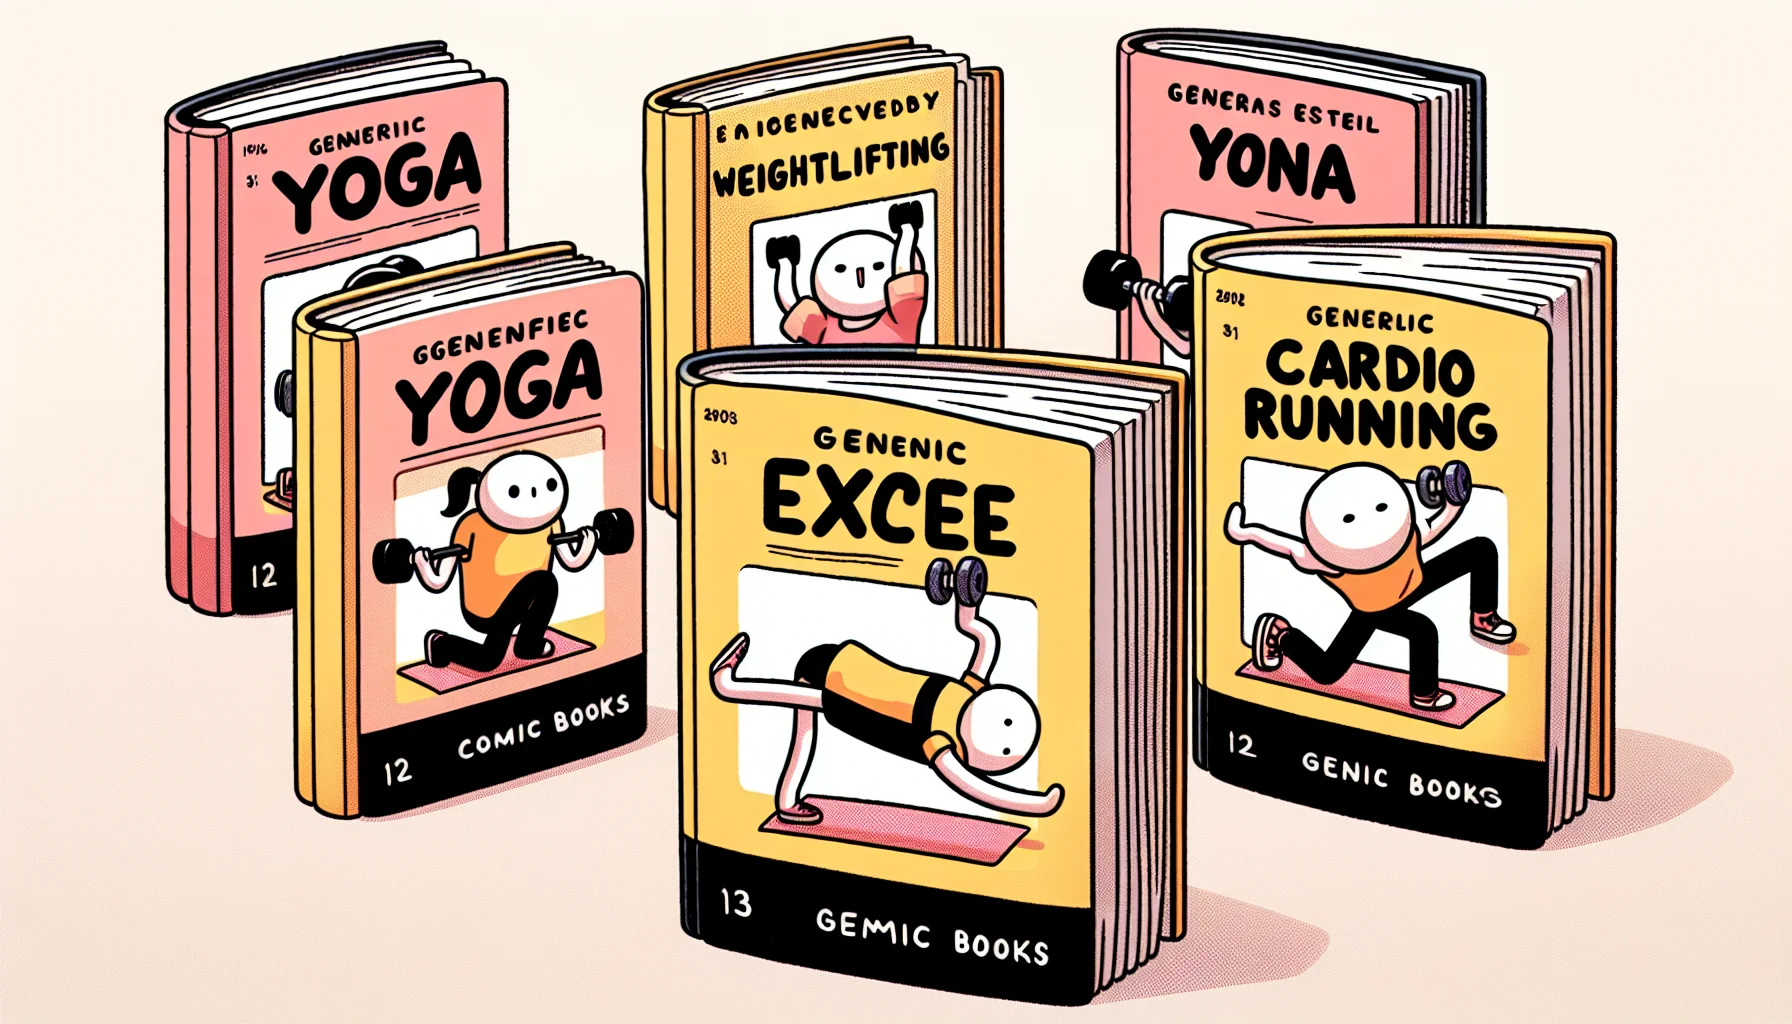 Create a whimsical and engaging scene depicting an array of generic comic books authored by an unidentified manga artist. Each book presents an entertaining story of its protagonist engaging in a different exercise routine: one showcases yoga, another focuses on weightlifting, a third details a cardio running workout. The books are anthropomorphised, with arms and legs, and they're humorously attempting the exercises on their pages, eliciting laughter and interest from onlooking potential readers, who represent a diverse range of genders and descents.